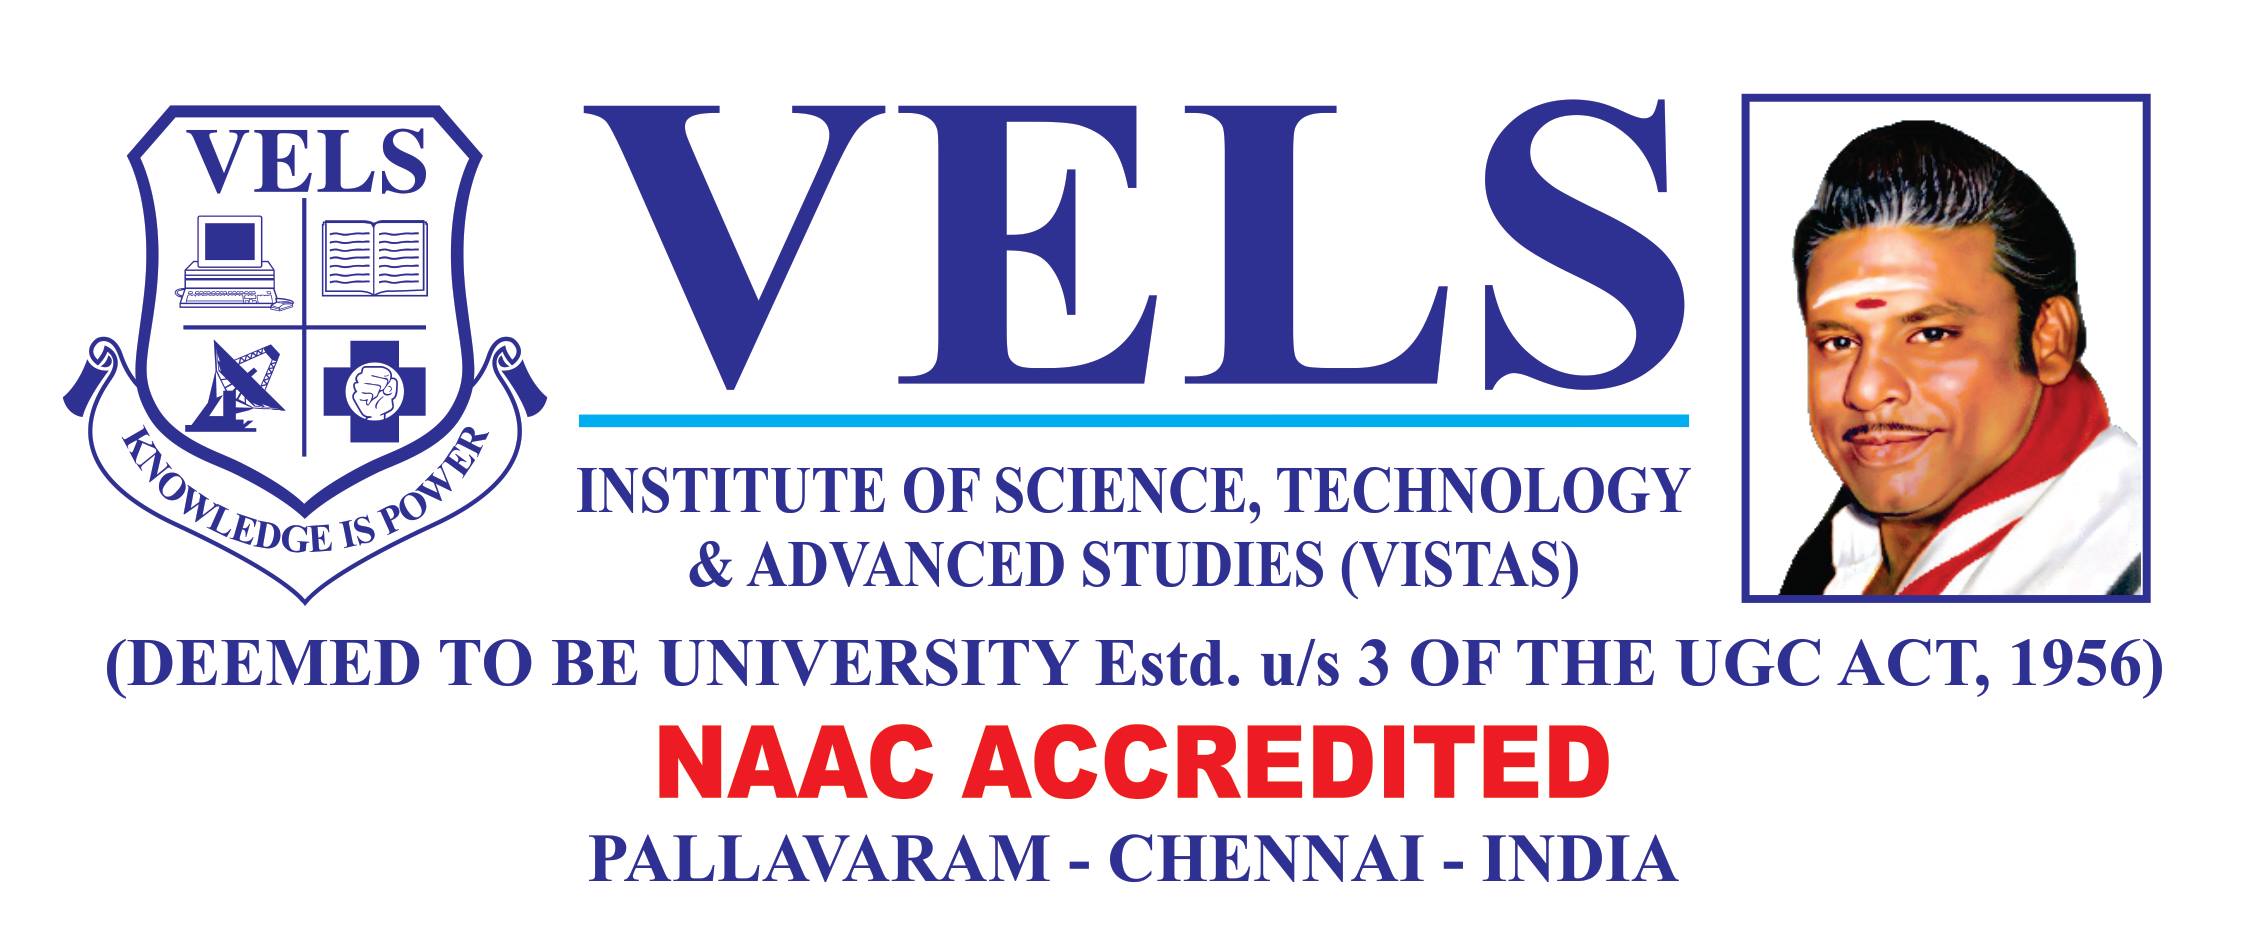 VELS INSTITUTE OF SCIENCE TECHNOLOGY & ADVANCED STUDIES-logo